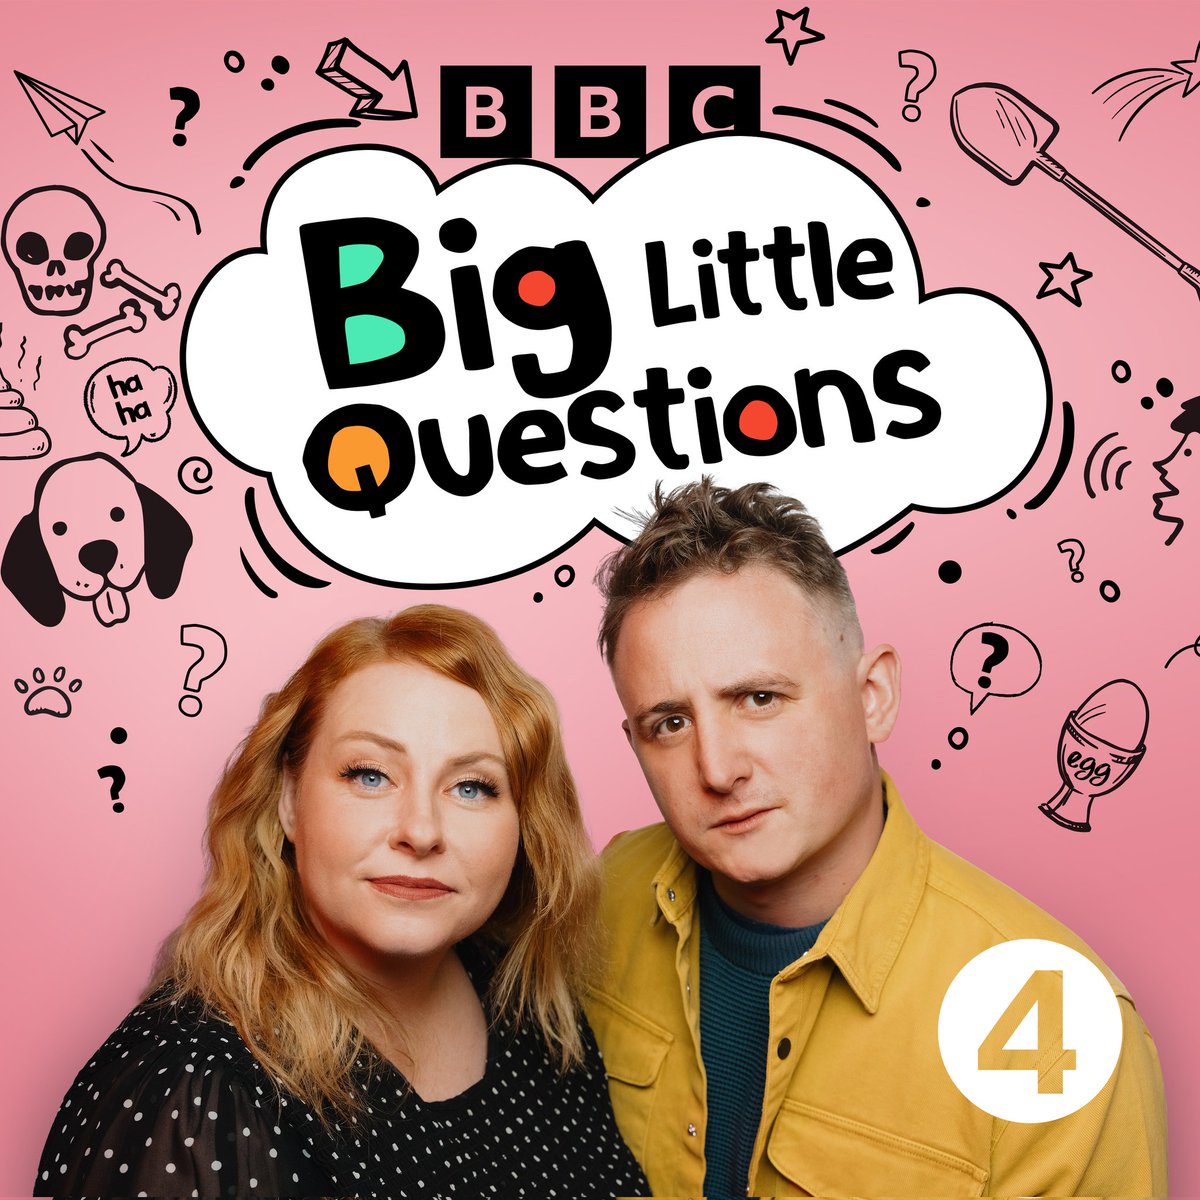 Our brand new @BBCRadio4 show launches Wednesday at 11PM! We investigate questions set for us by (actually very discerning) children. 🙇🤦‍♀️🤷‍♂️🙋‍♀️💁🙆‍♂️ It's the most wholesome thing we've attempted but it's still doused in classic sausage grot. 🌭🥰 Can't wait for you to hear it!